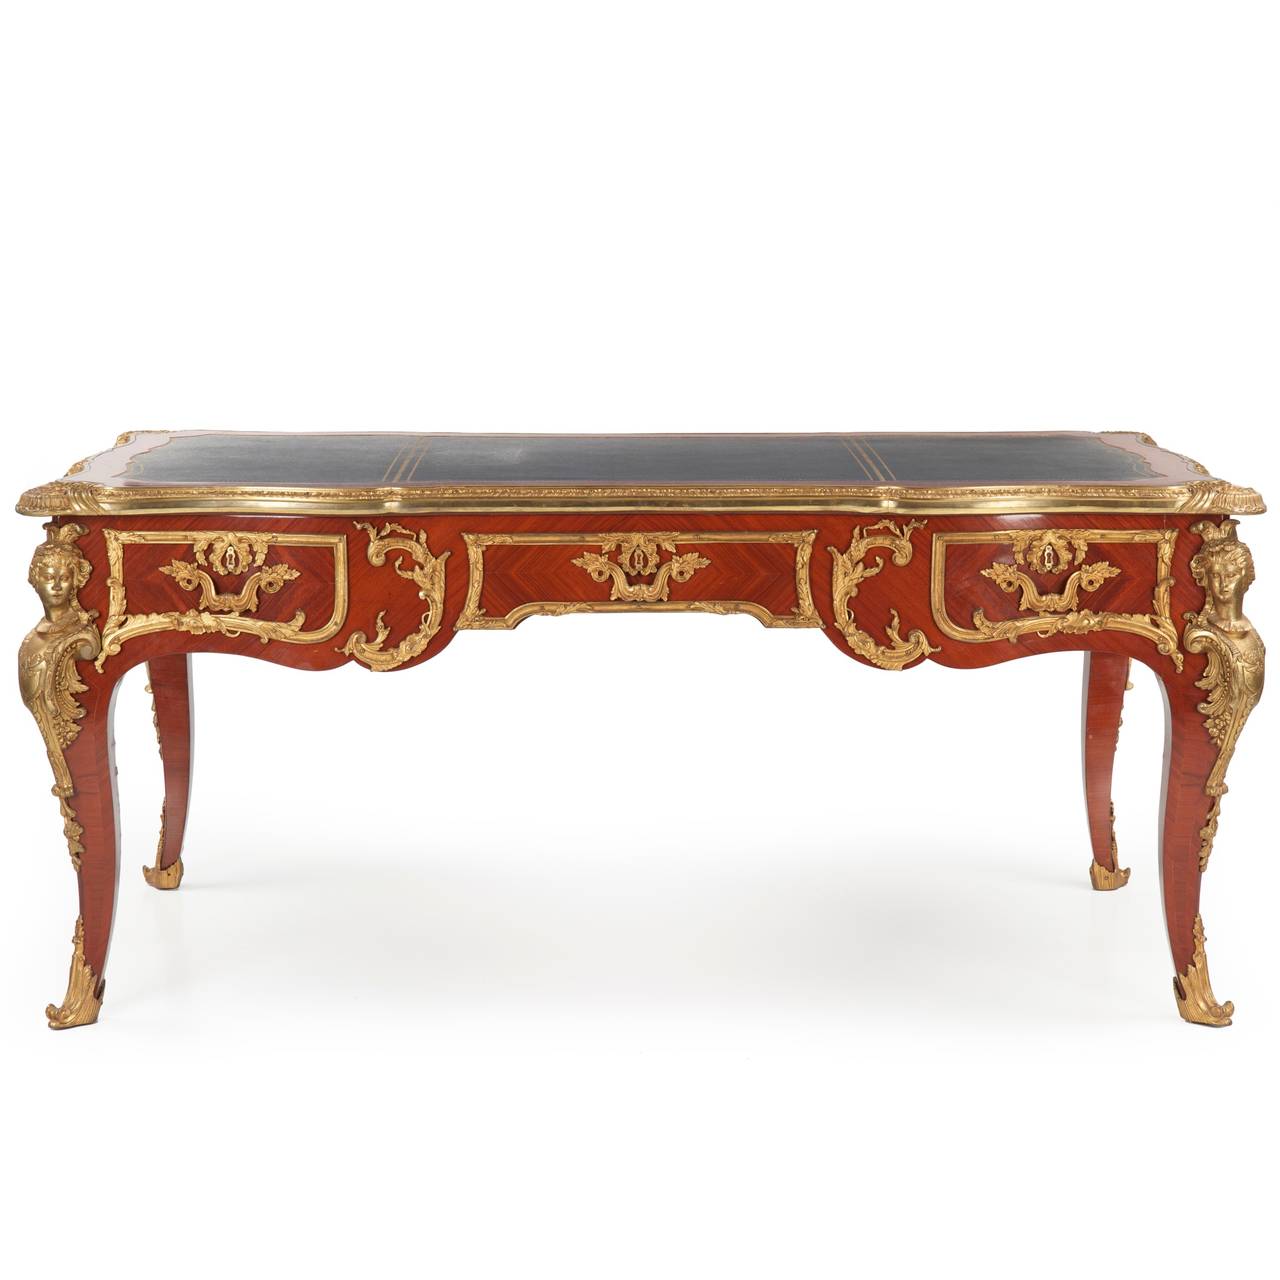 FRENCH LOUIS XV STYLE ORMOLU MOUNTED KINGWOOD BUREAU PLAT
20th Century, Crafted in Spain

This is an unusually well crafted bureau plat, the weight of it being considerable in it's solid core construction.  Stamped on the underside 